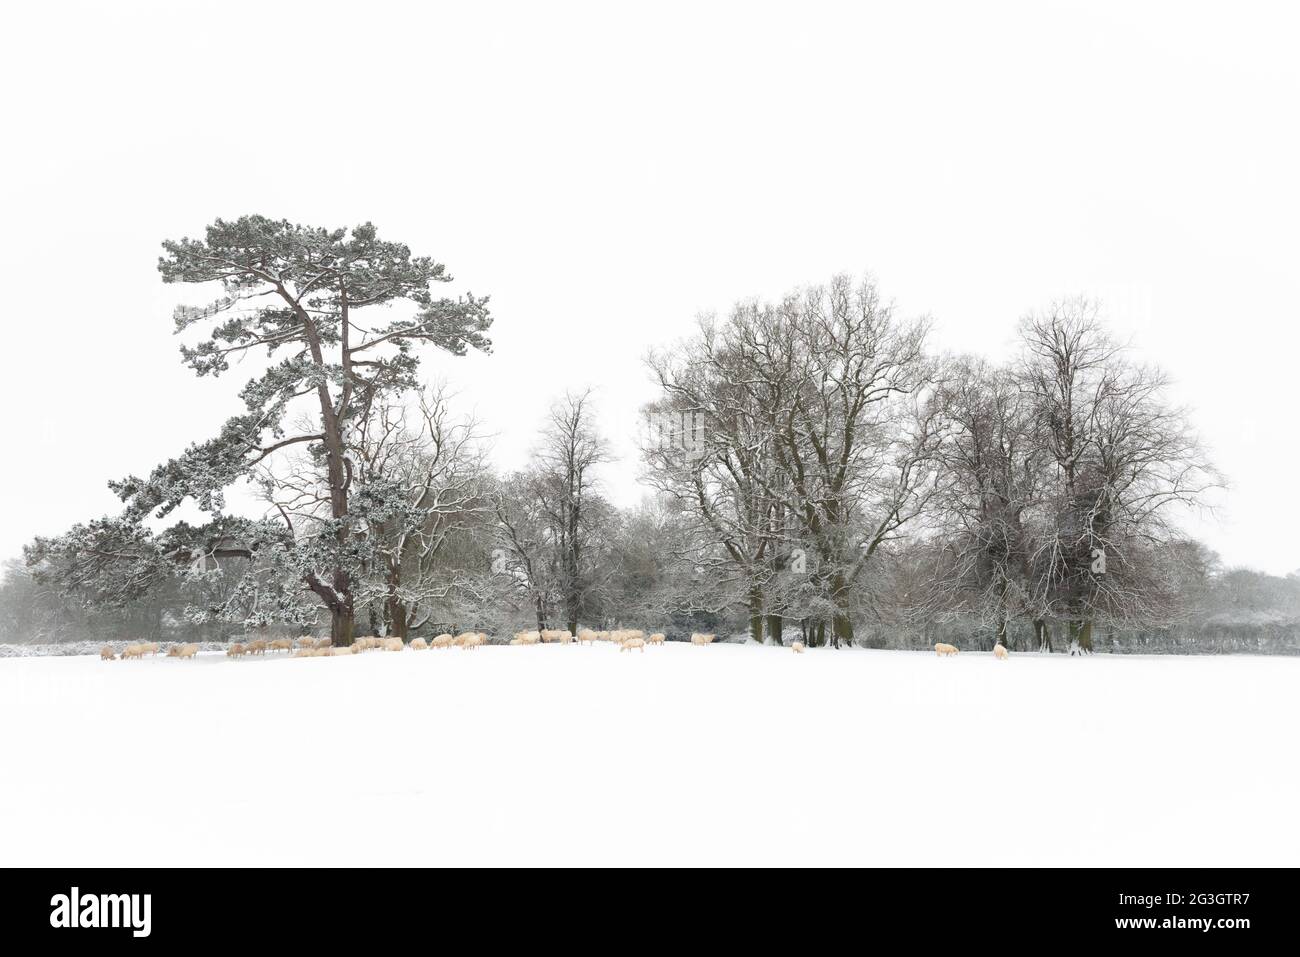 Flock of sheep in snow under trees, Watford Park, Northamptonshire Stock Photo